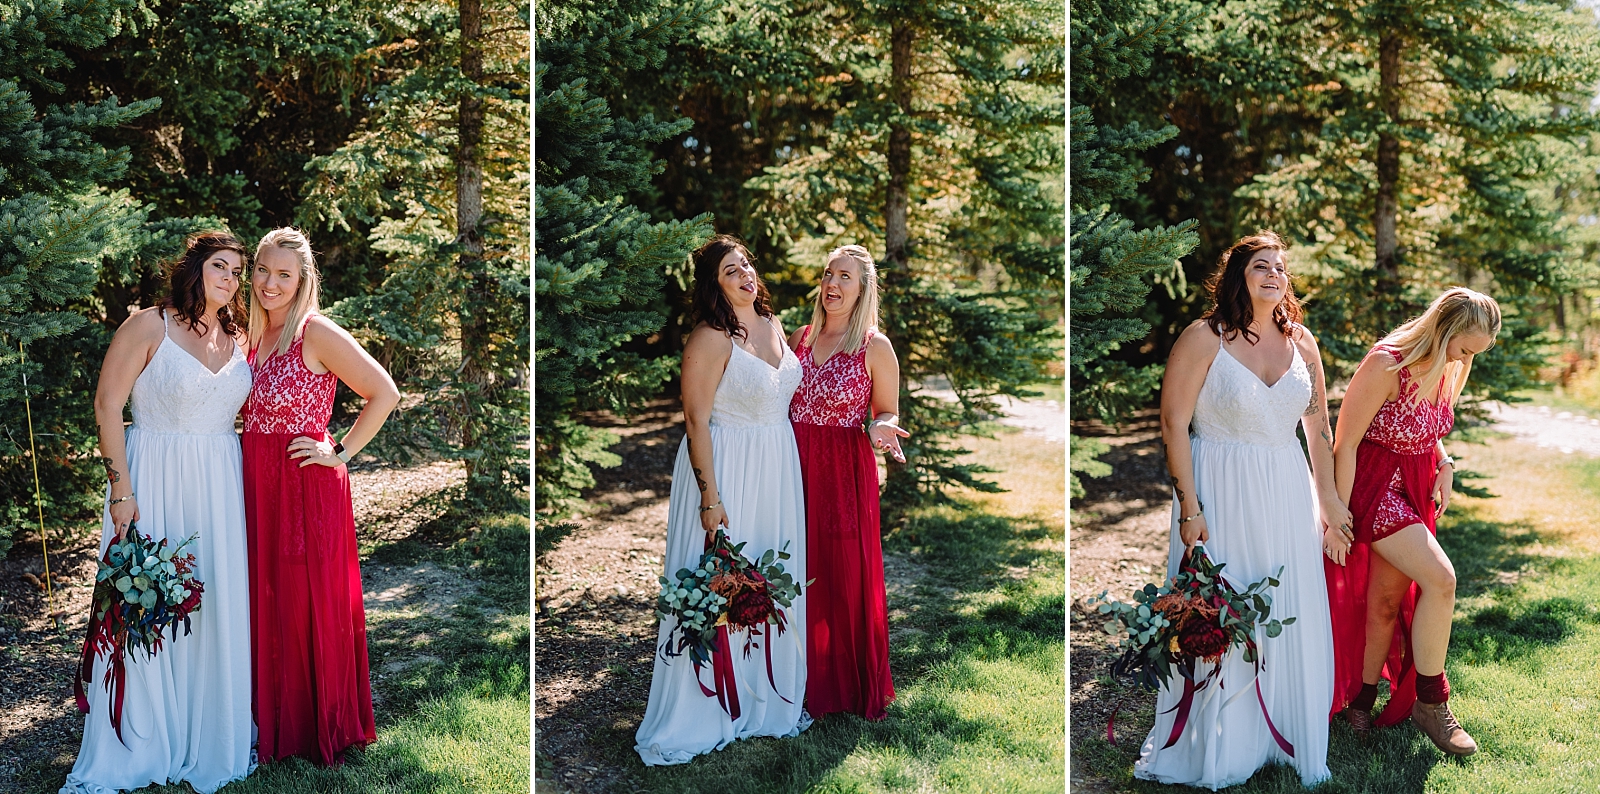 maid of honor and bride outdoor